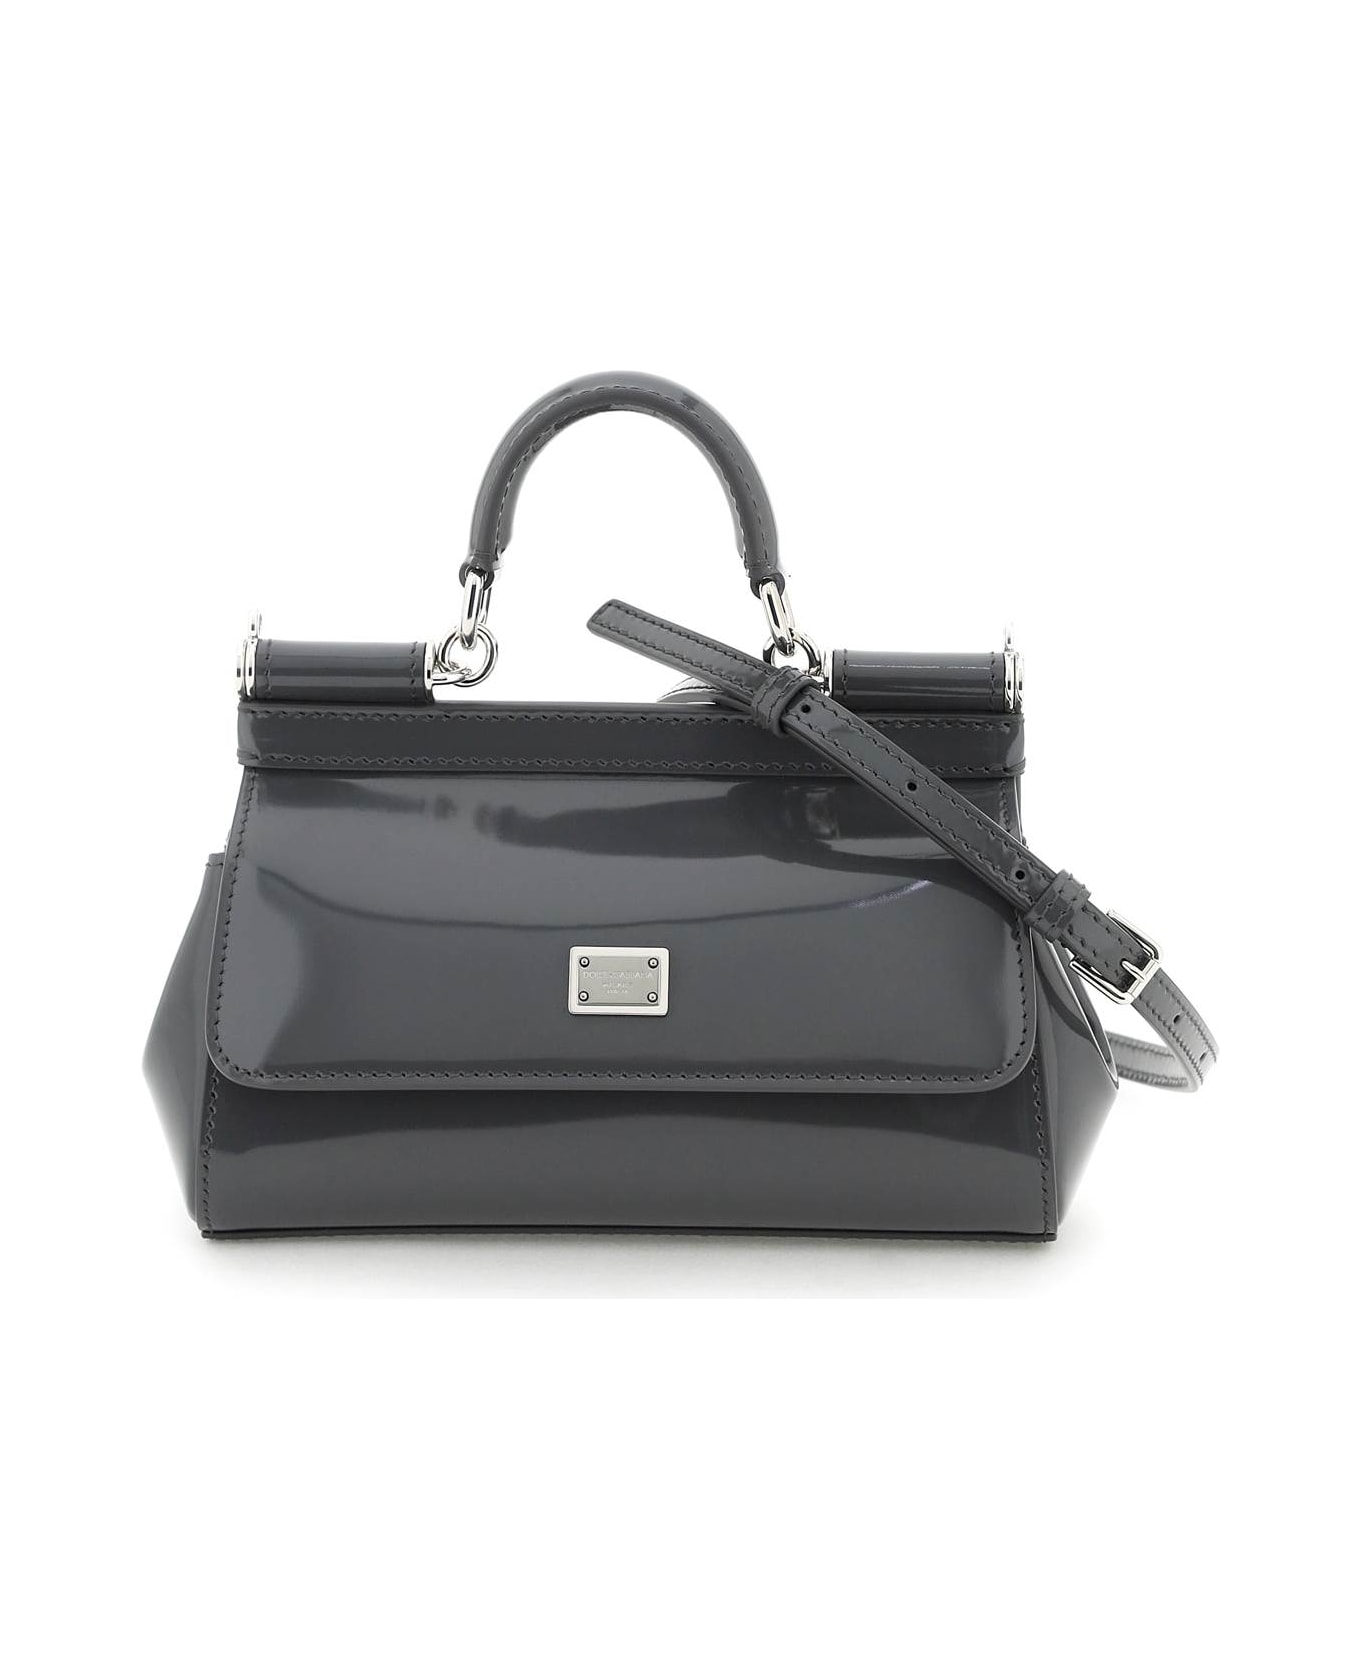 Dolce & Gabbana Patent Leather Small 'sicily' Bag - Grey